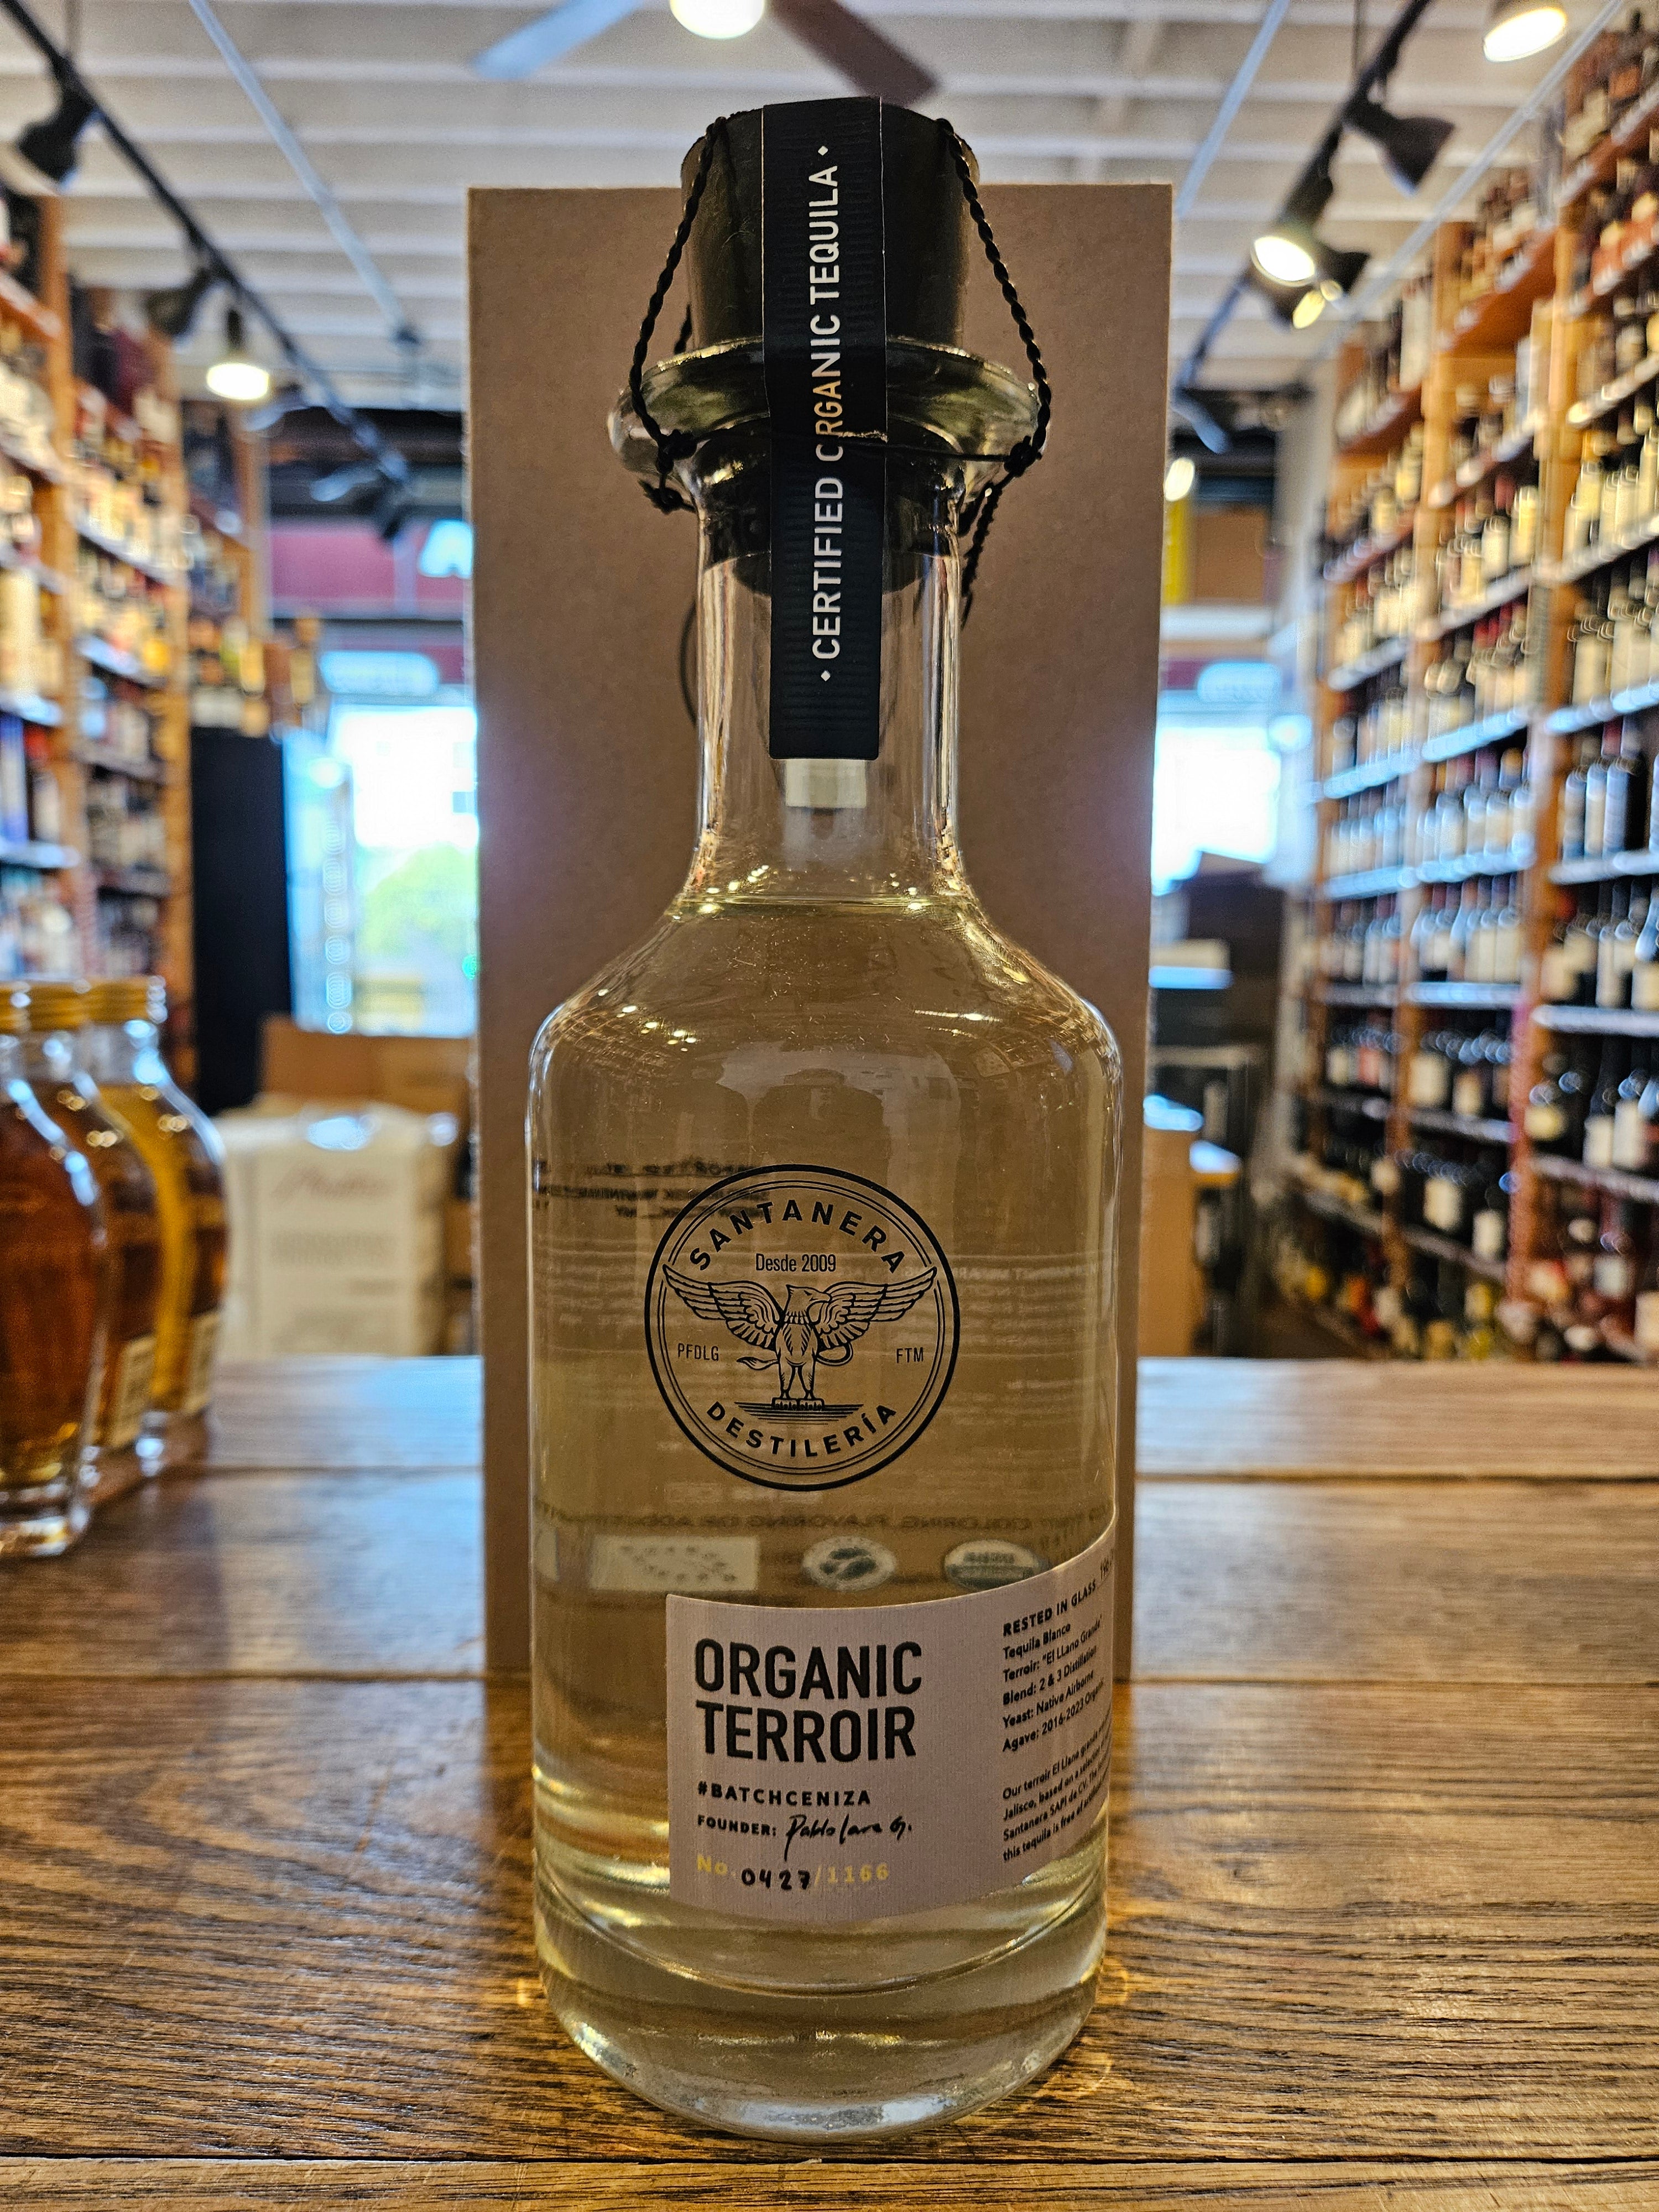 Santanera Organic Tequila Blanco Batch-Ceniza 750mL a clear round shouldered glass bottle with a thick neck and white label and black wooden top in front of a rectangular brown box